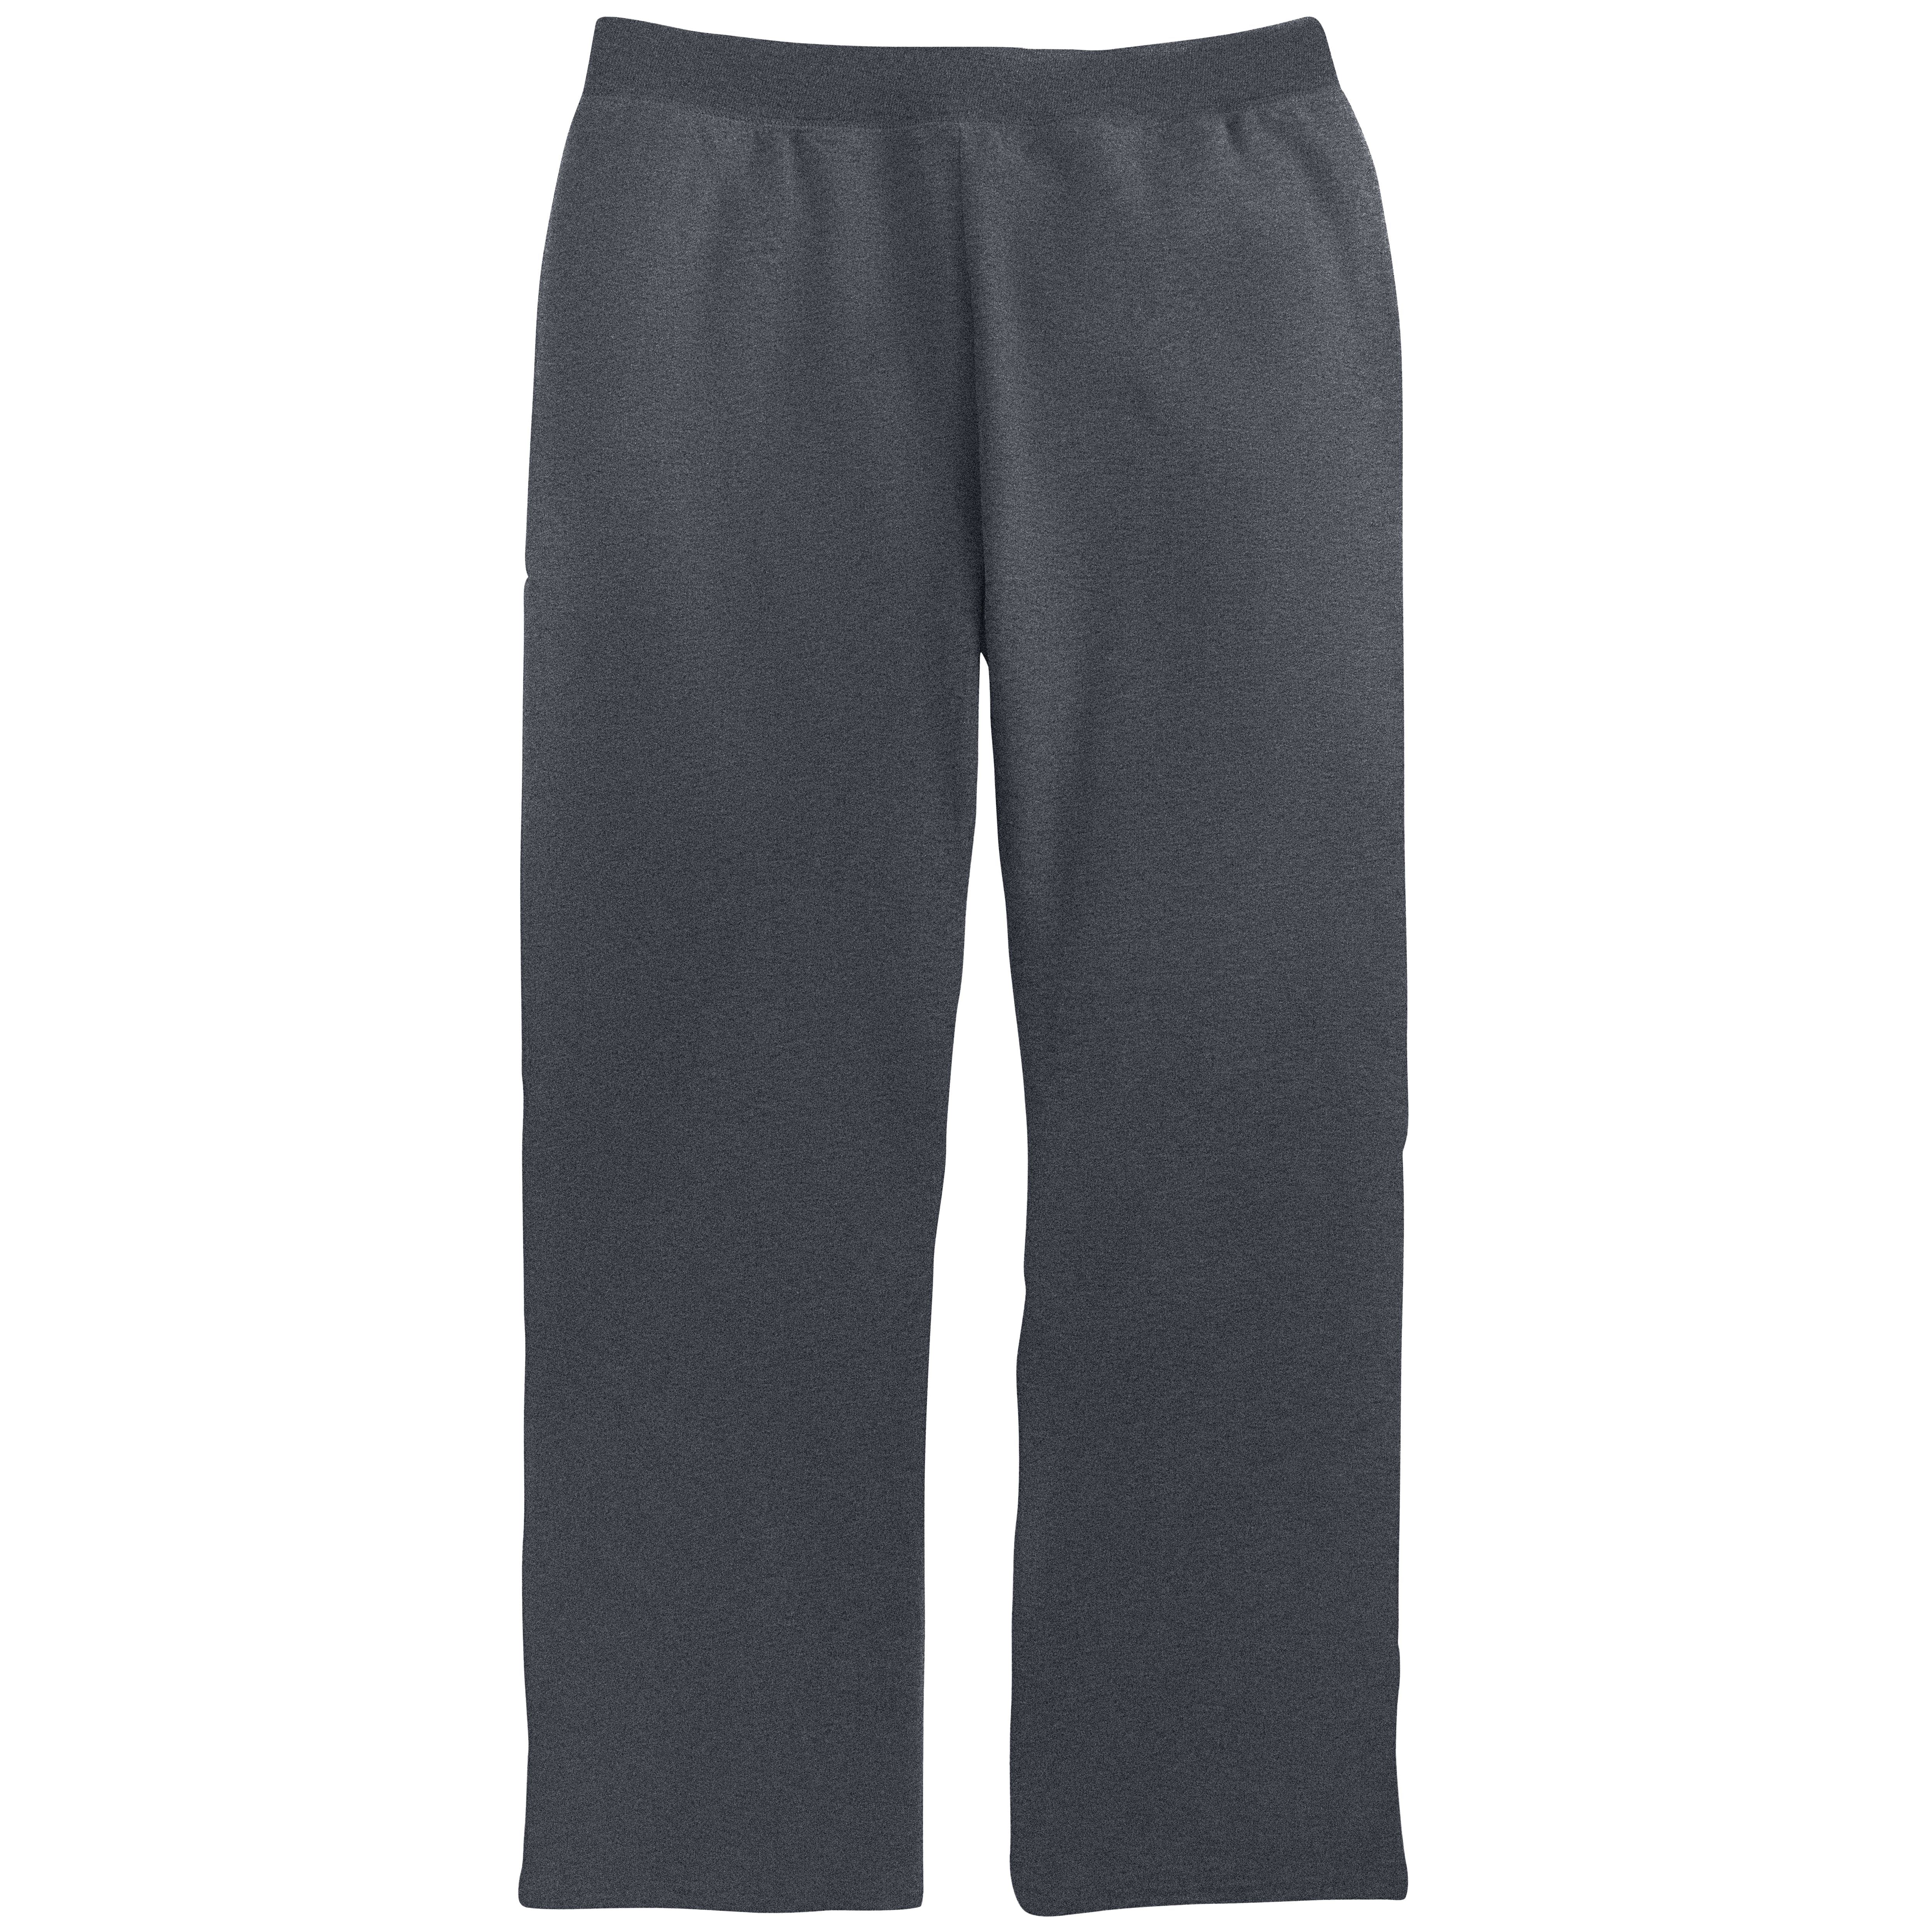 Hanes sweatpants for women • Compare best prices »